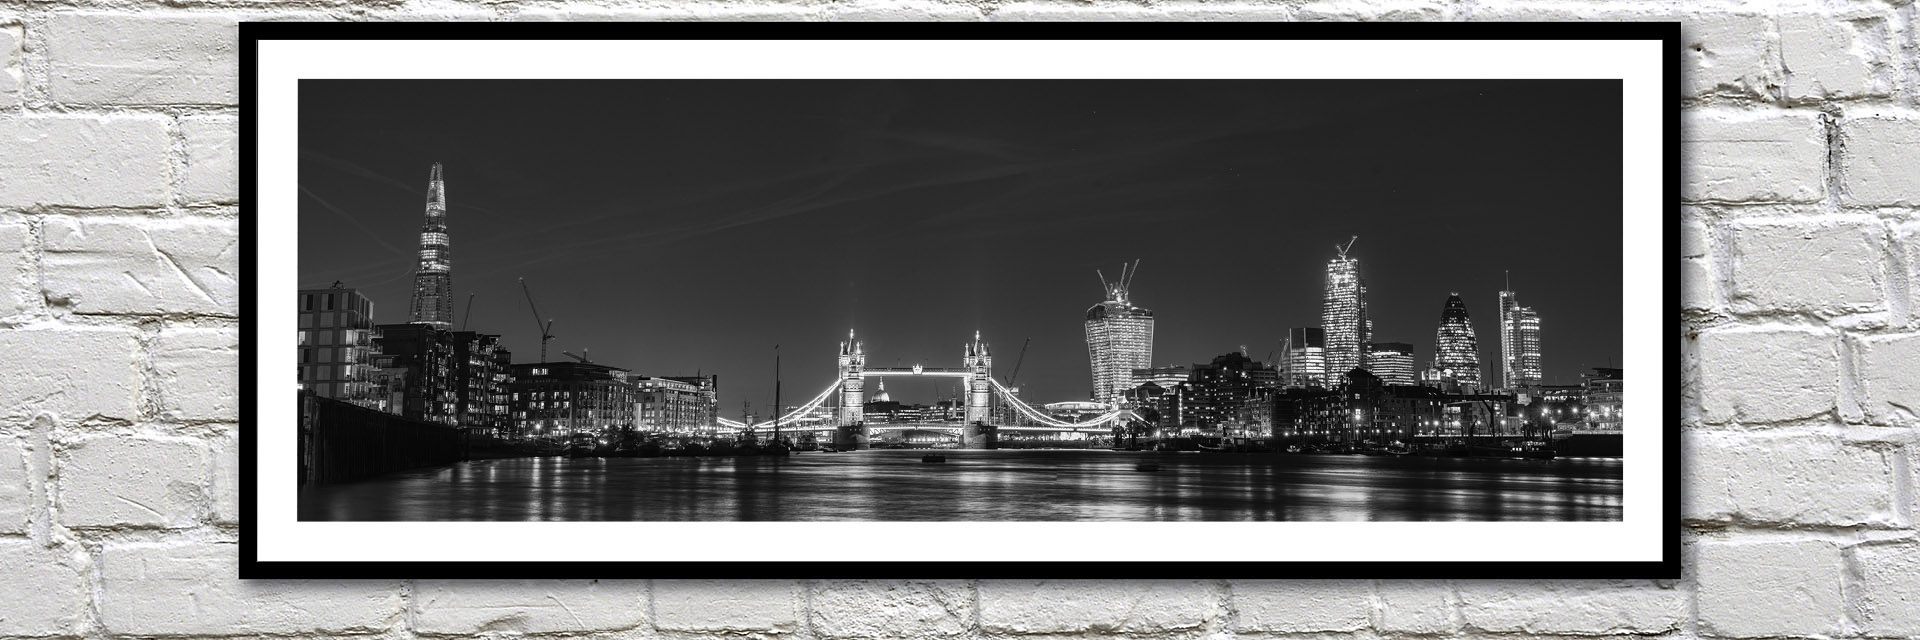 Office art ideas London black and white framed pictures 